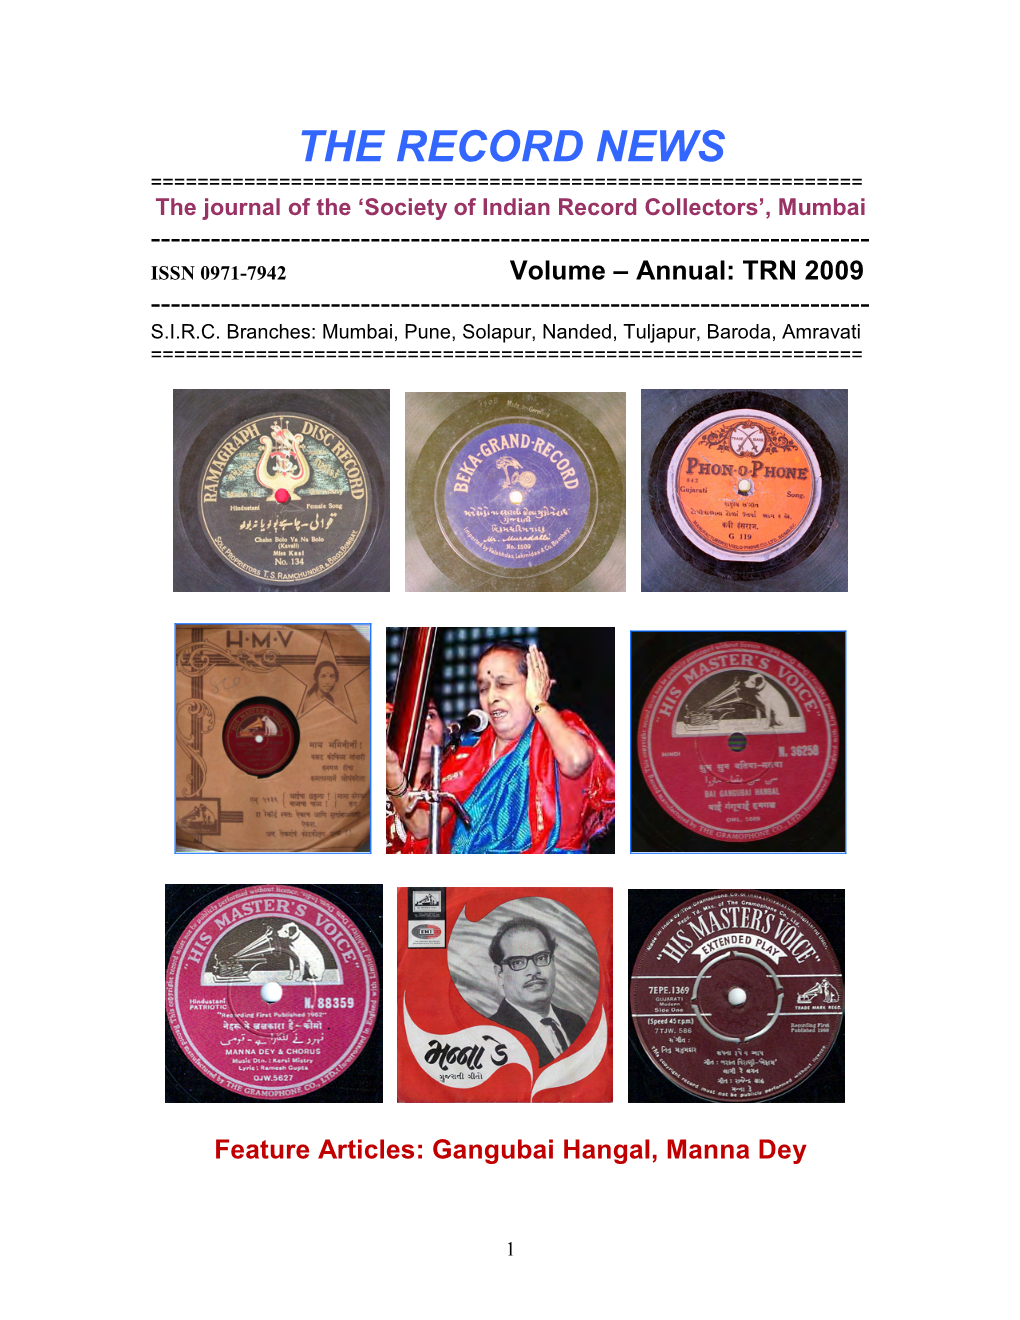 THE RECORD NEWS ======The Journal of the ‘Society of Indian Record Collectors’, Mumbai ------ISSN 0971-7942 Volume – Annual: TRN 2009 ------S.I.R.C